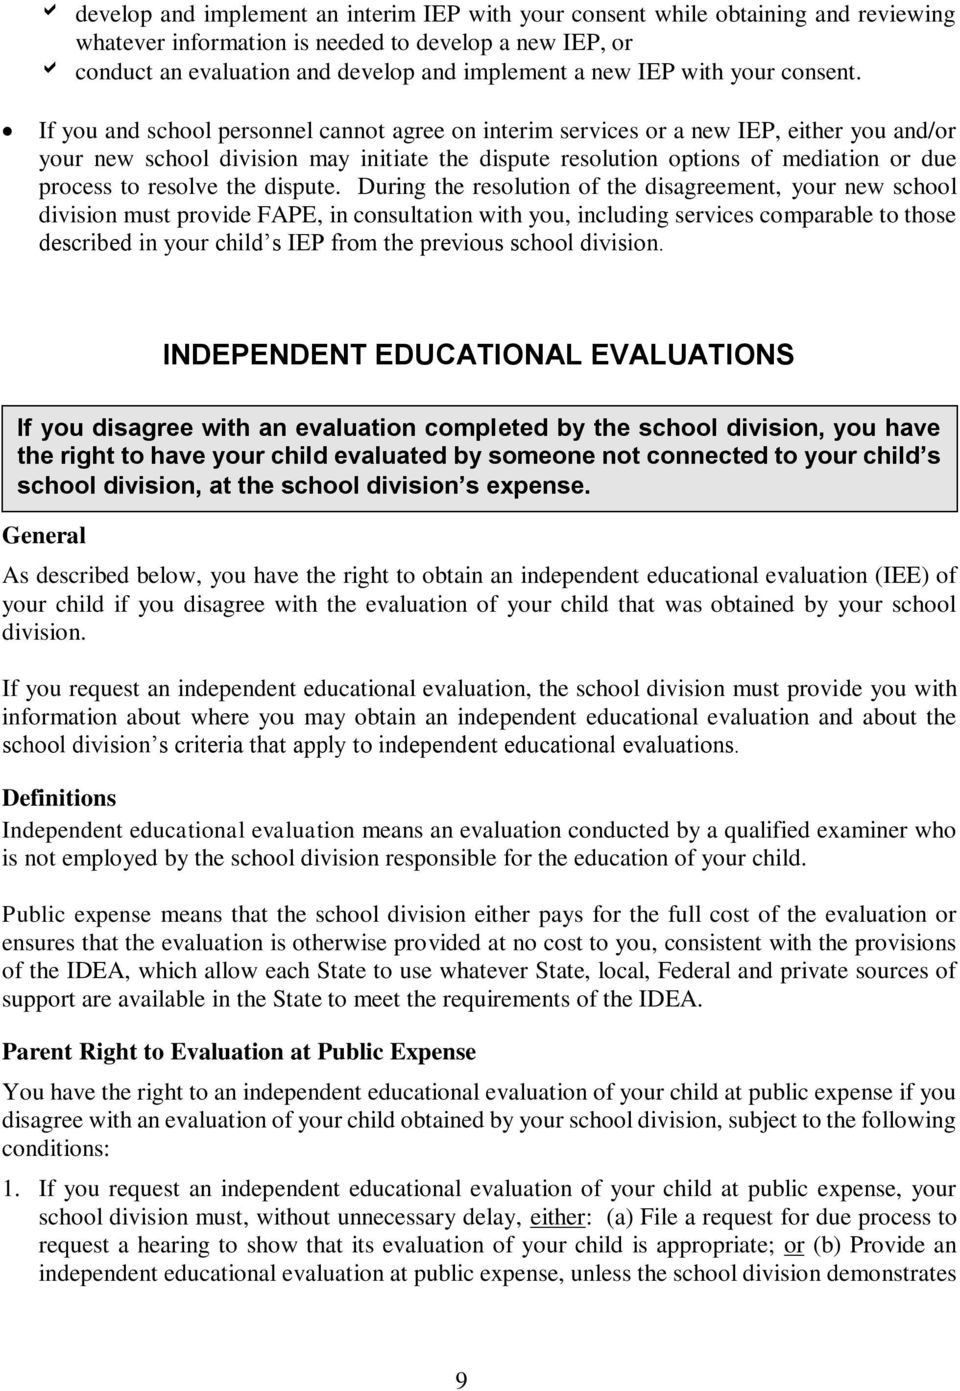 If you and school personnel cannot agree on interim services or a new IEP, either you and/or your new school division may initiate the dispute resolution options of mediation or due process to